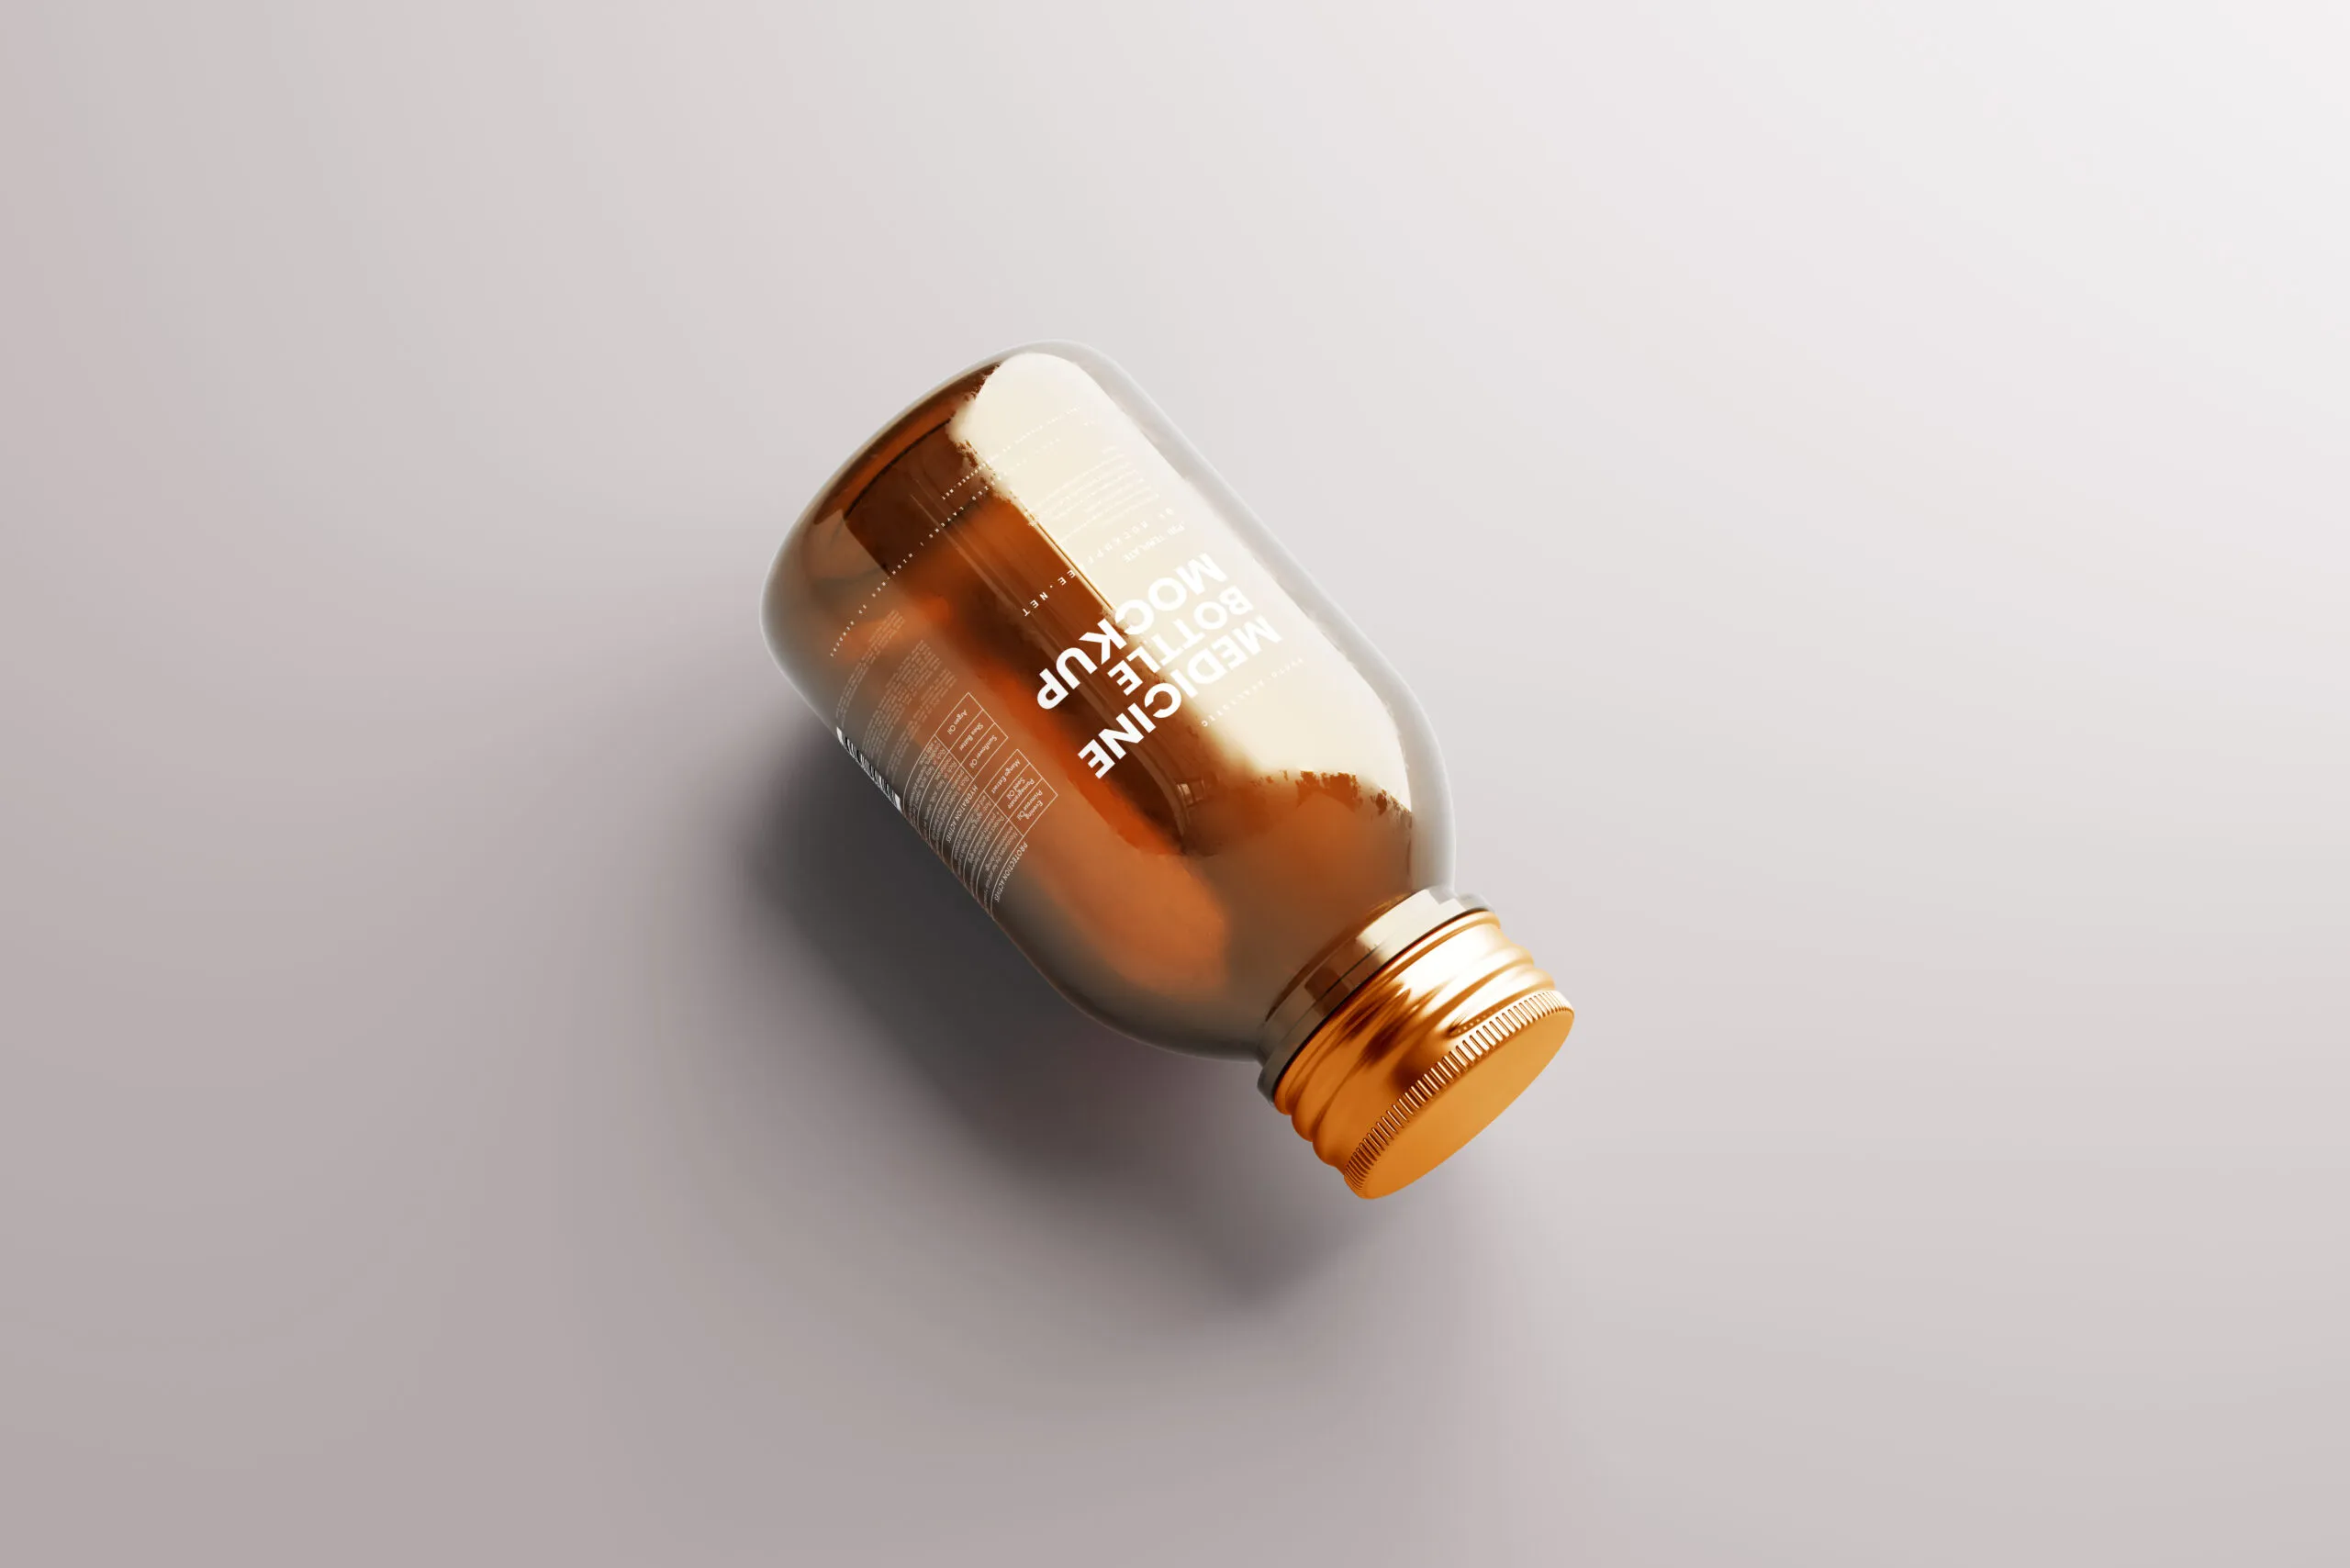 5 Small Liquid Medicine Bottle Mockups in Different Sights FREE PSD